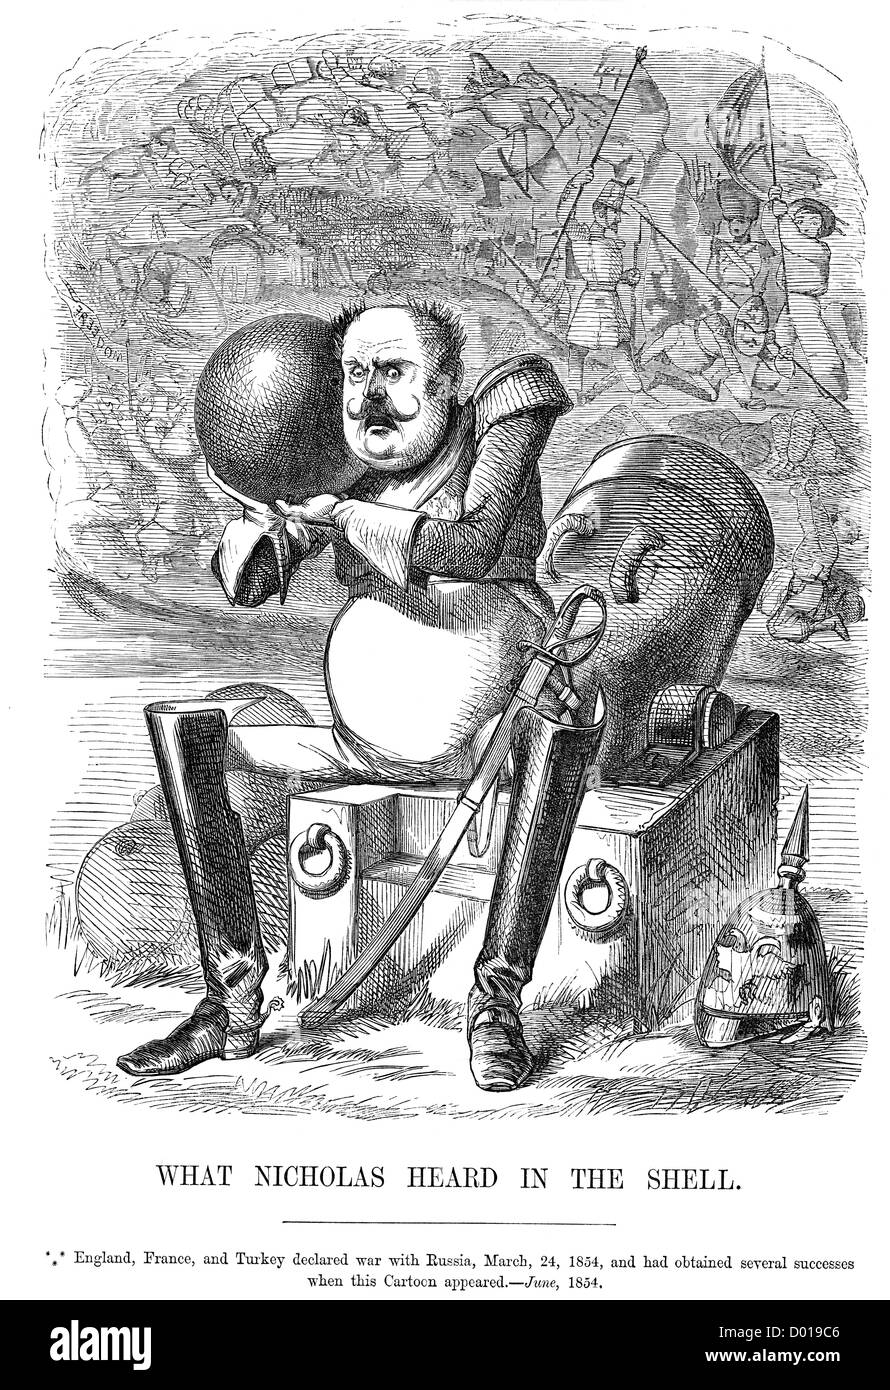 Caricature of Tsar Nicholas I of Russia at the start of the Crimean War. Stock Photo